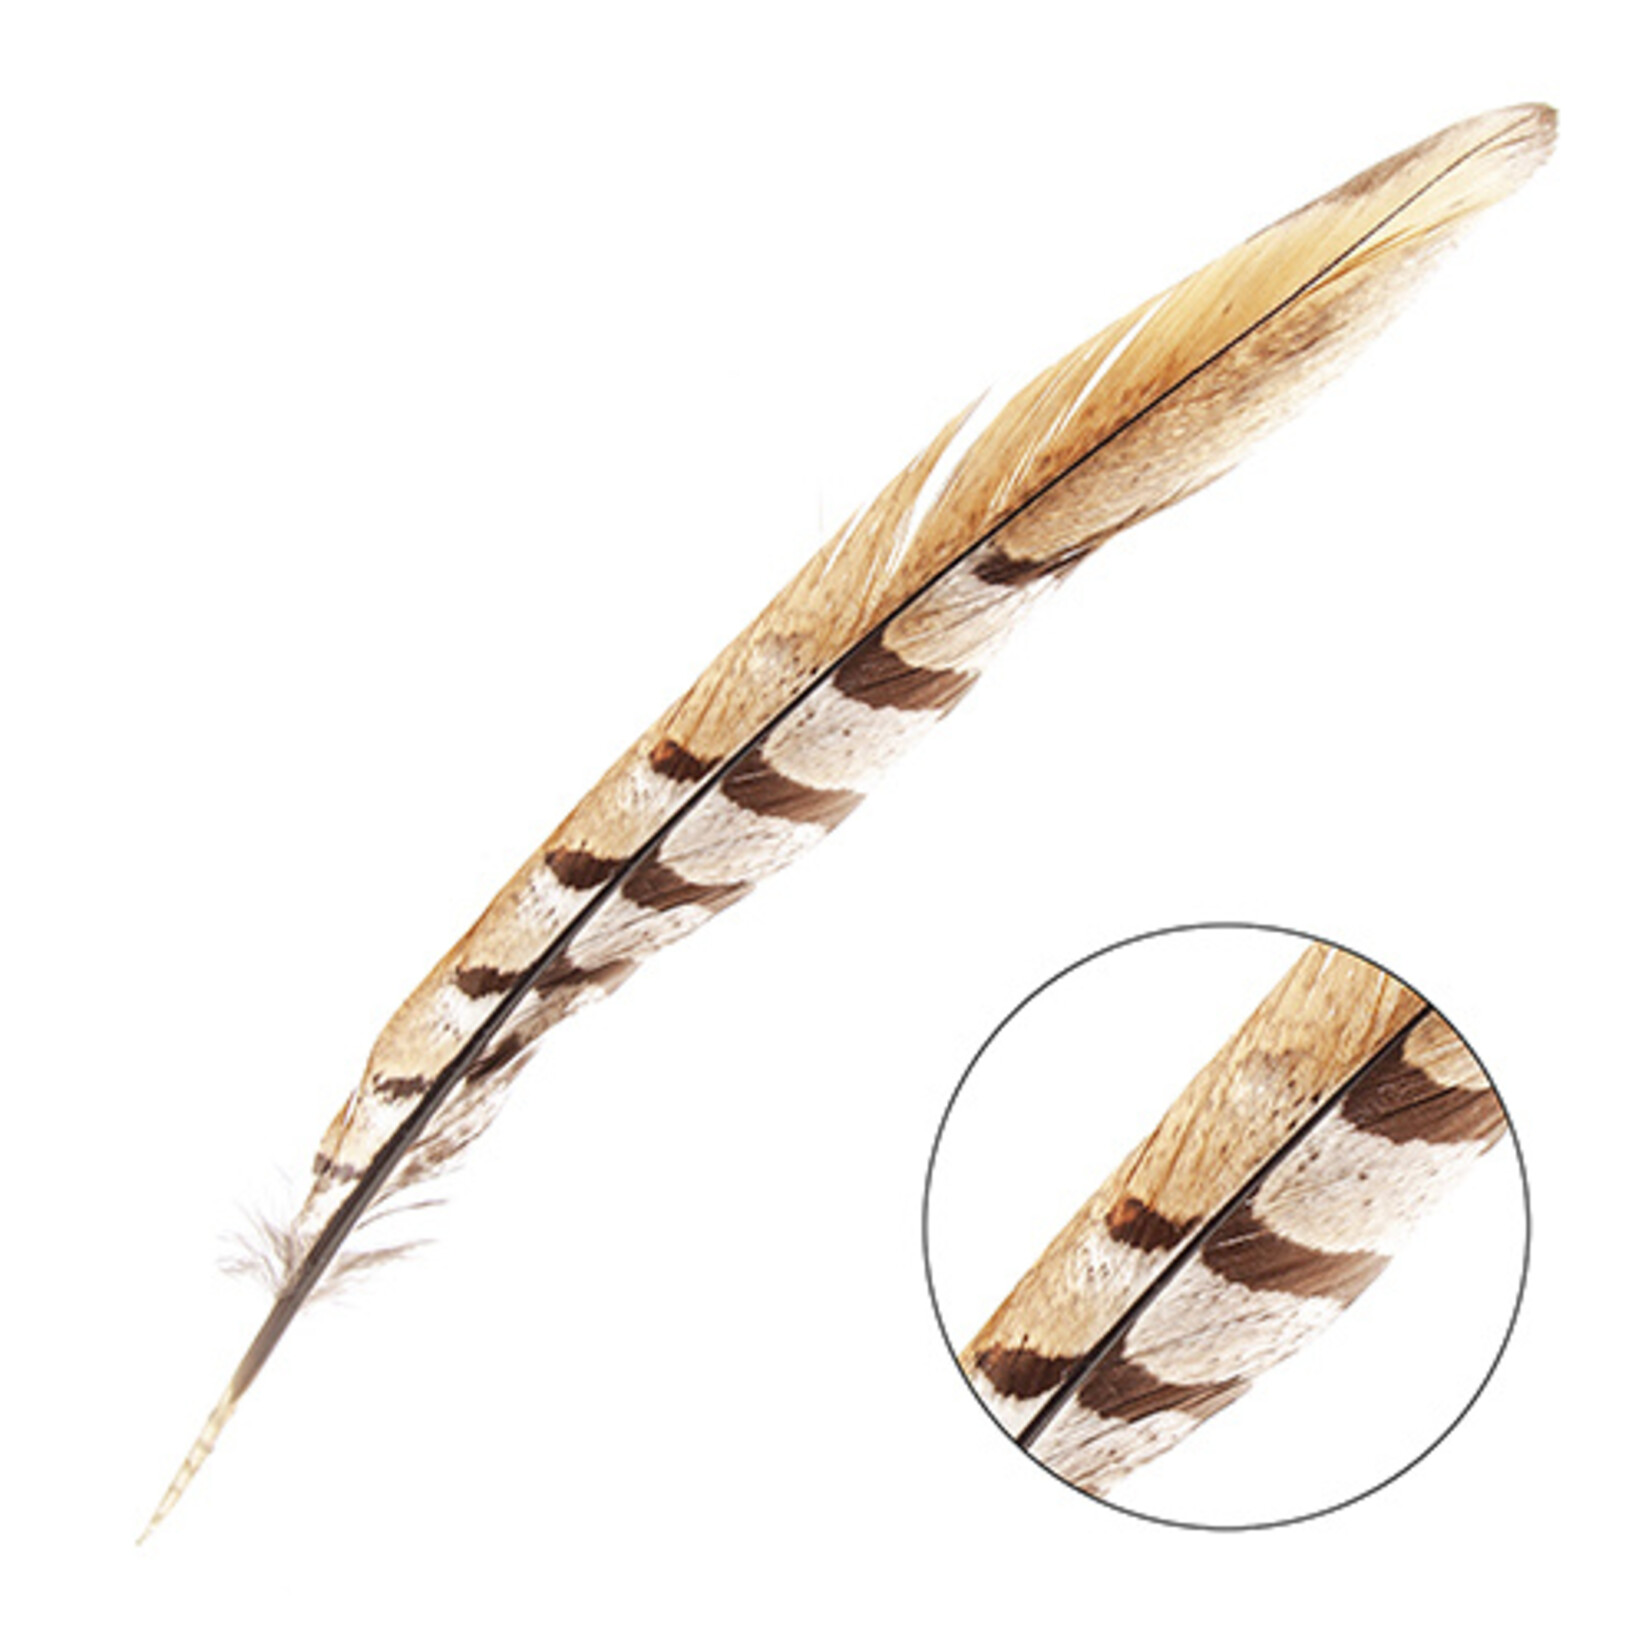 Reeves Pheasant Tail Natural 10 - 12 Inch (3 pieces)